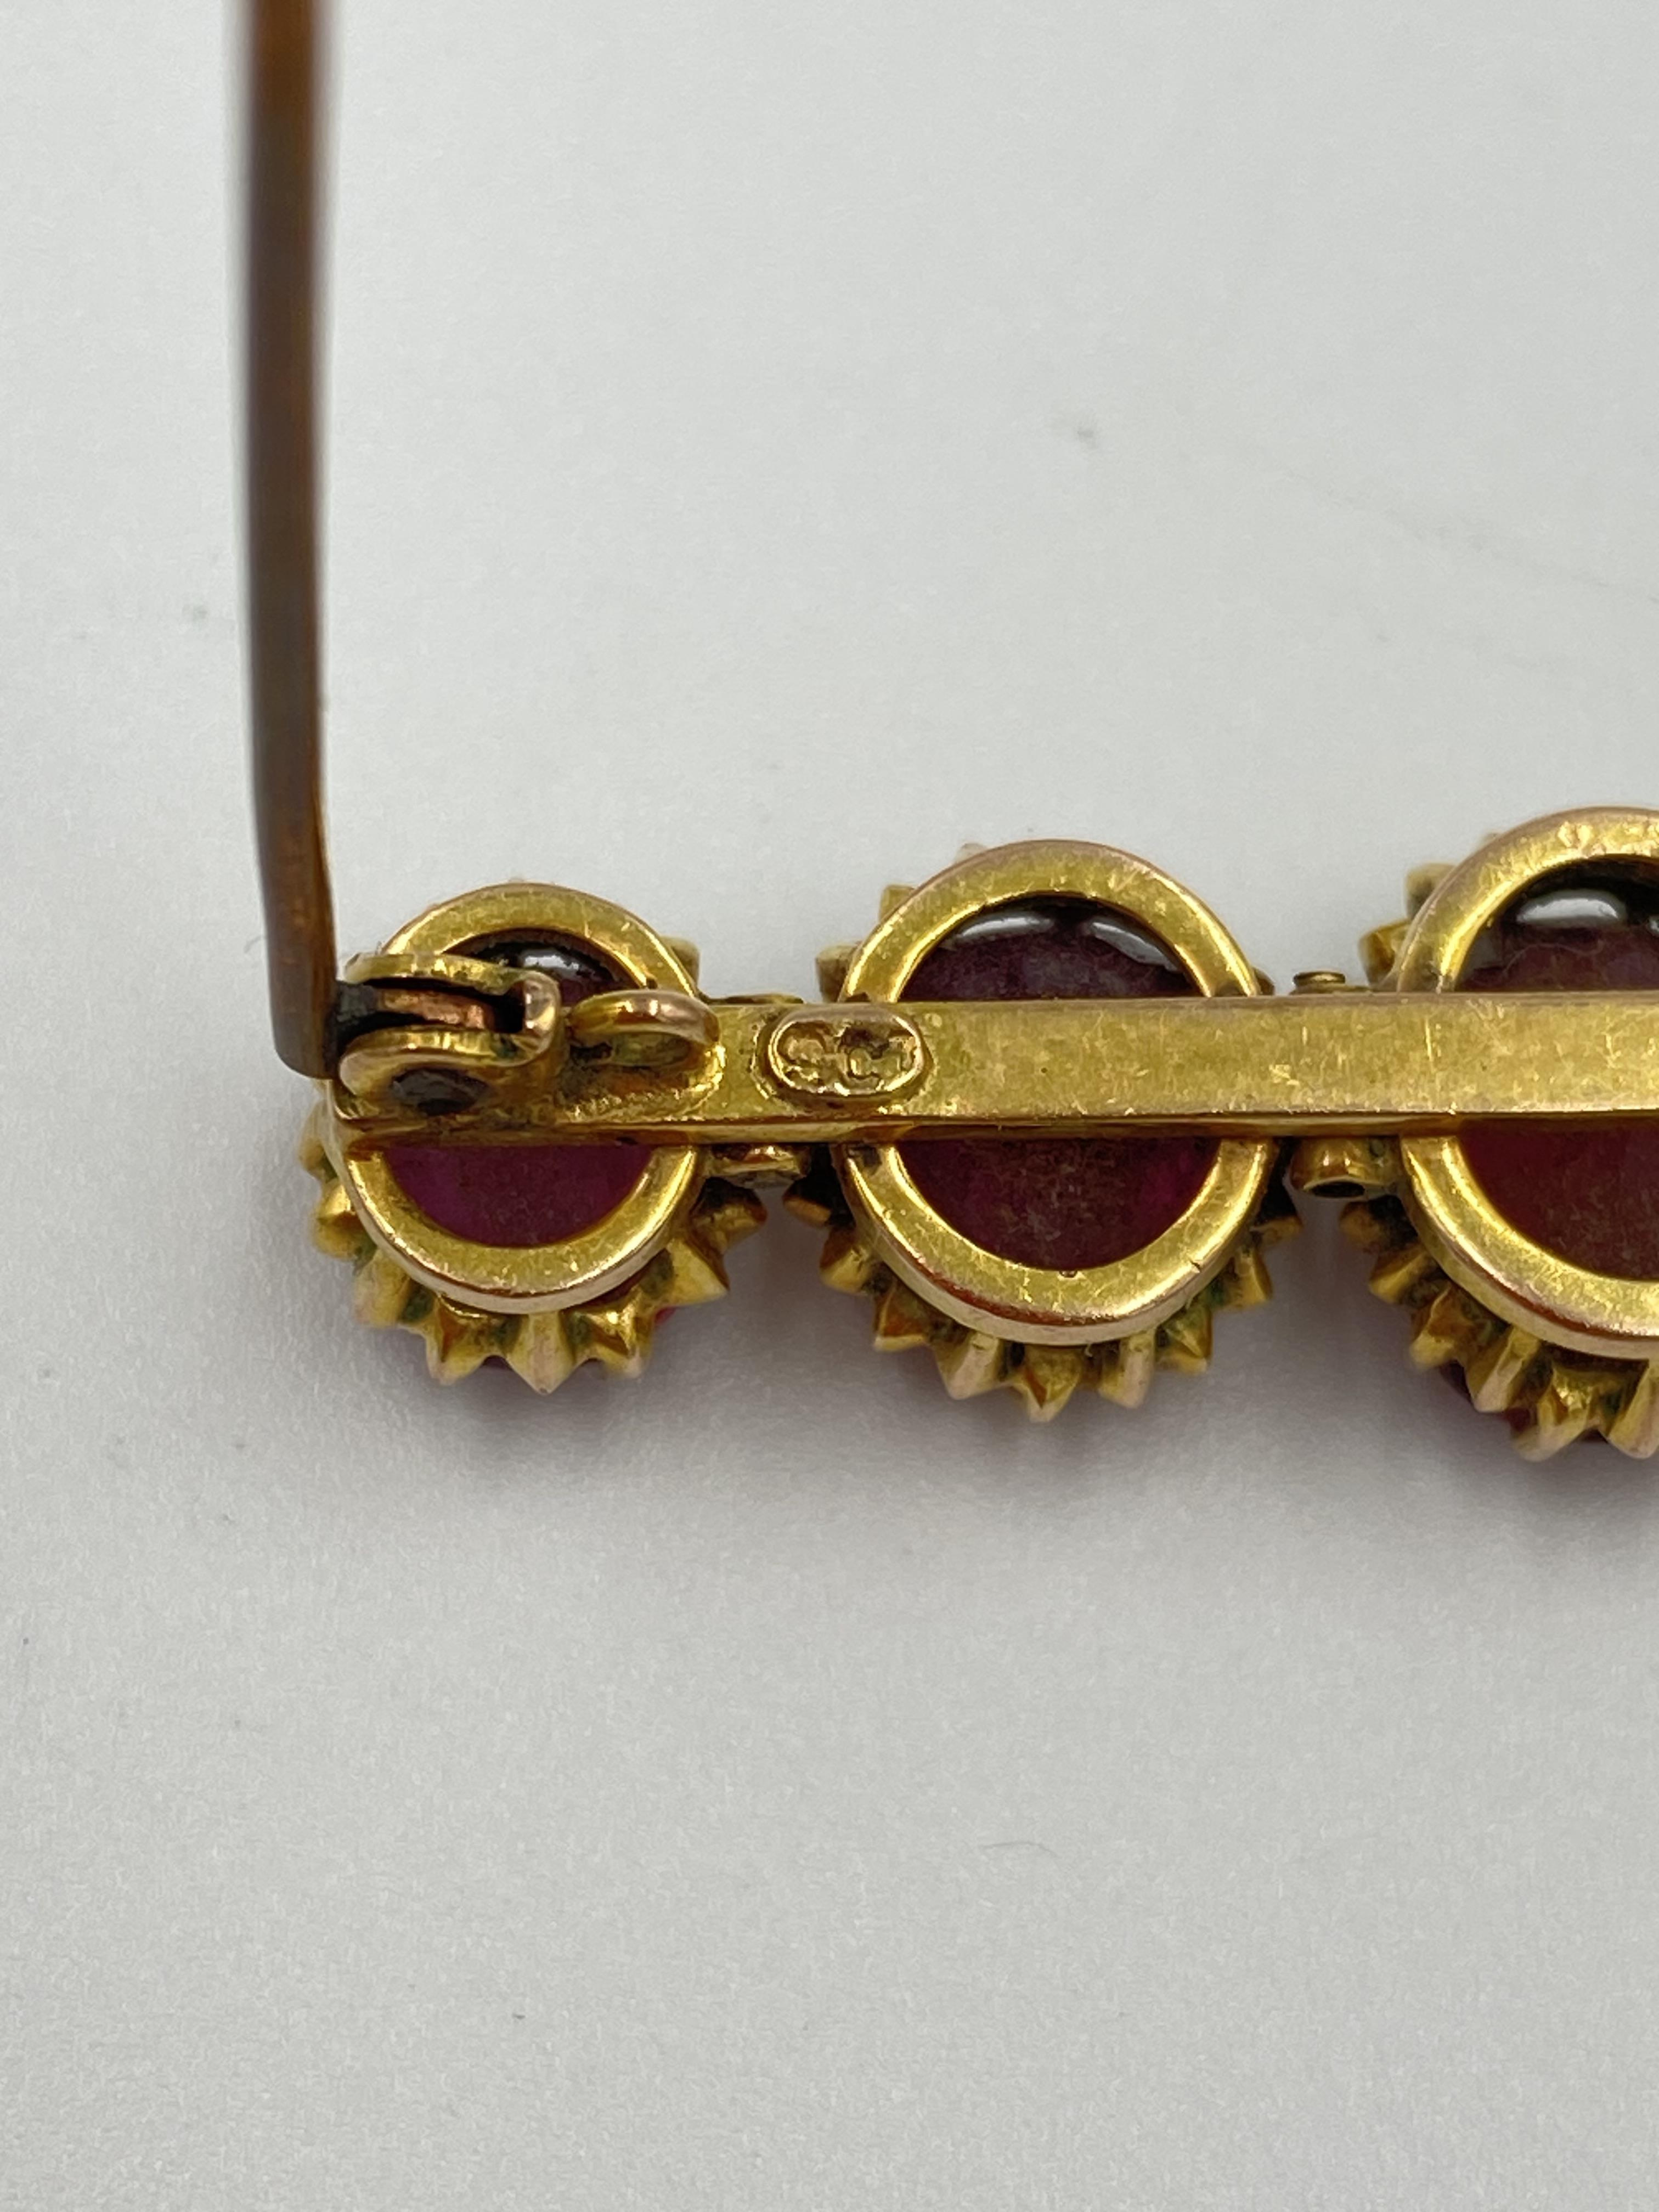 9ct gold and tourmaline brooch - Image 5 of 6